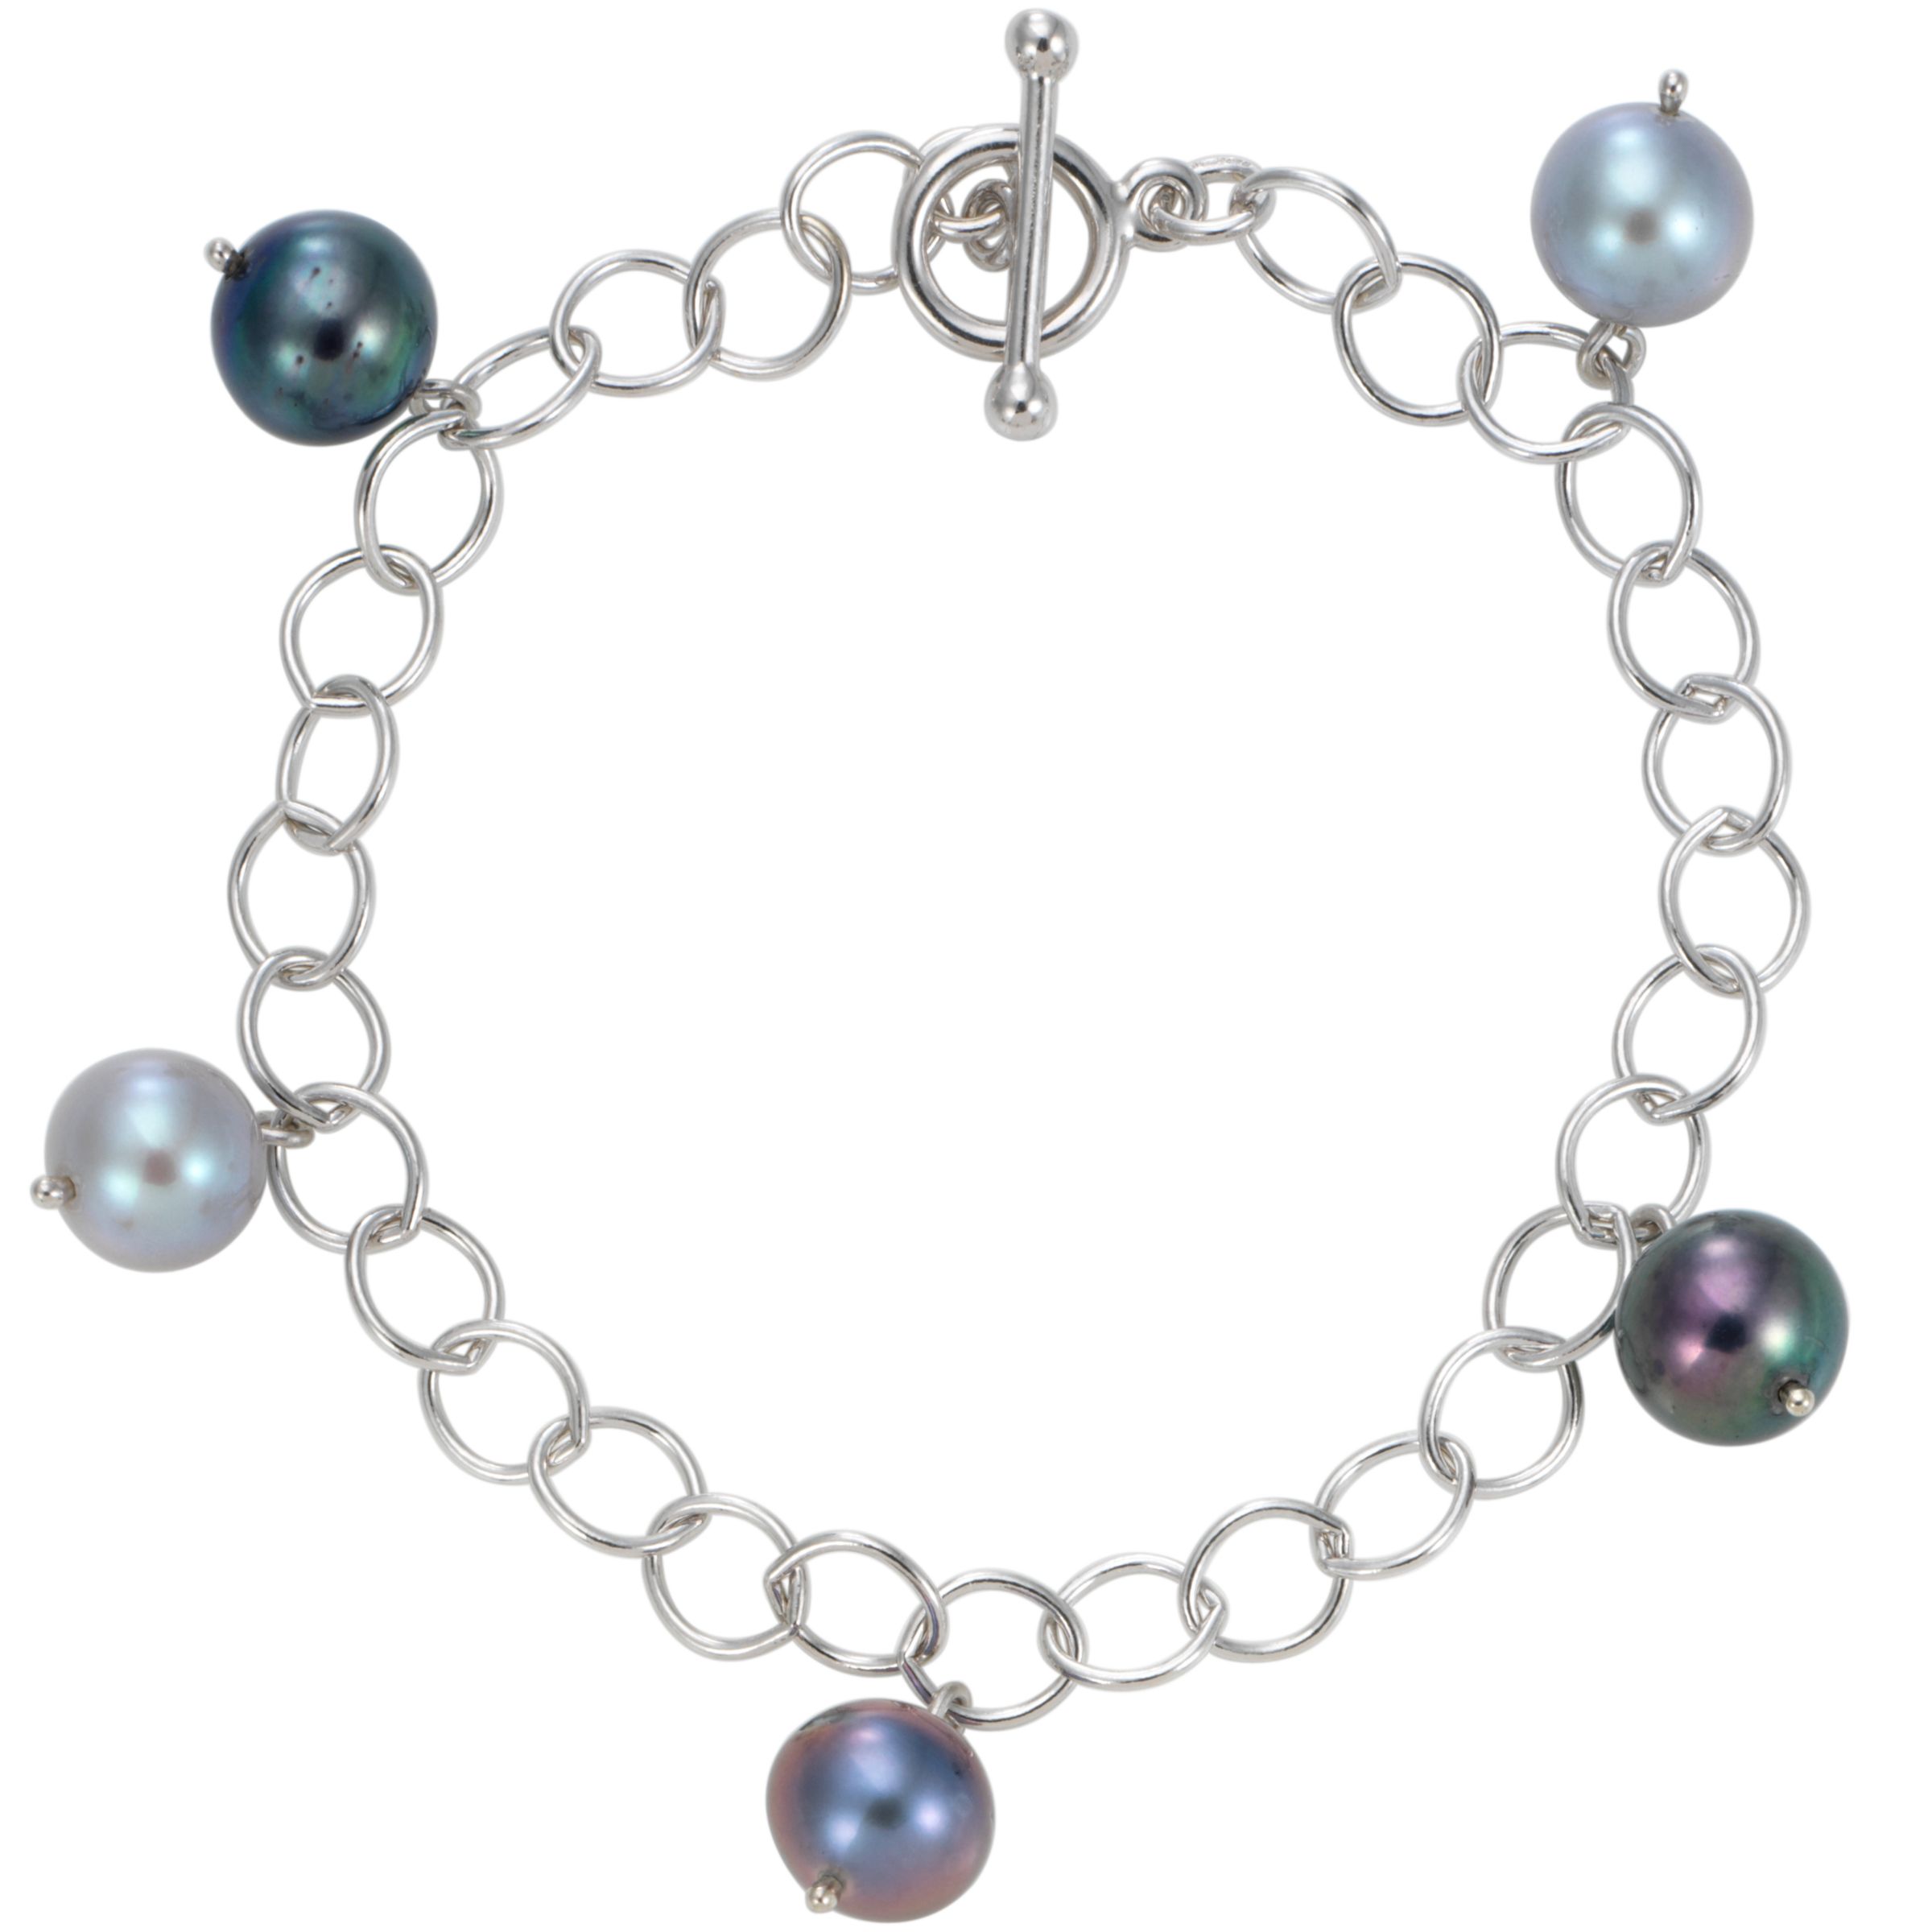 London Road White Gold and Pastel Cultured Fresh Water Pearl Bracelet at John Lewis